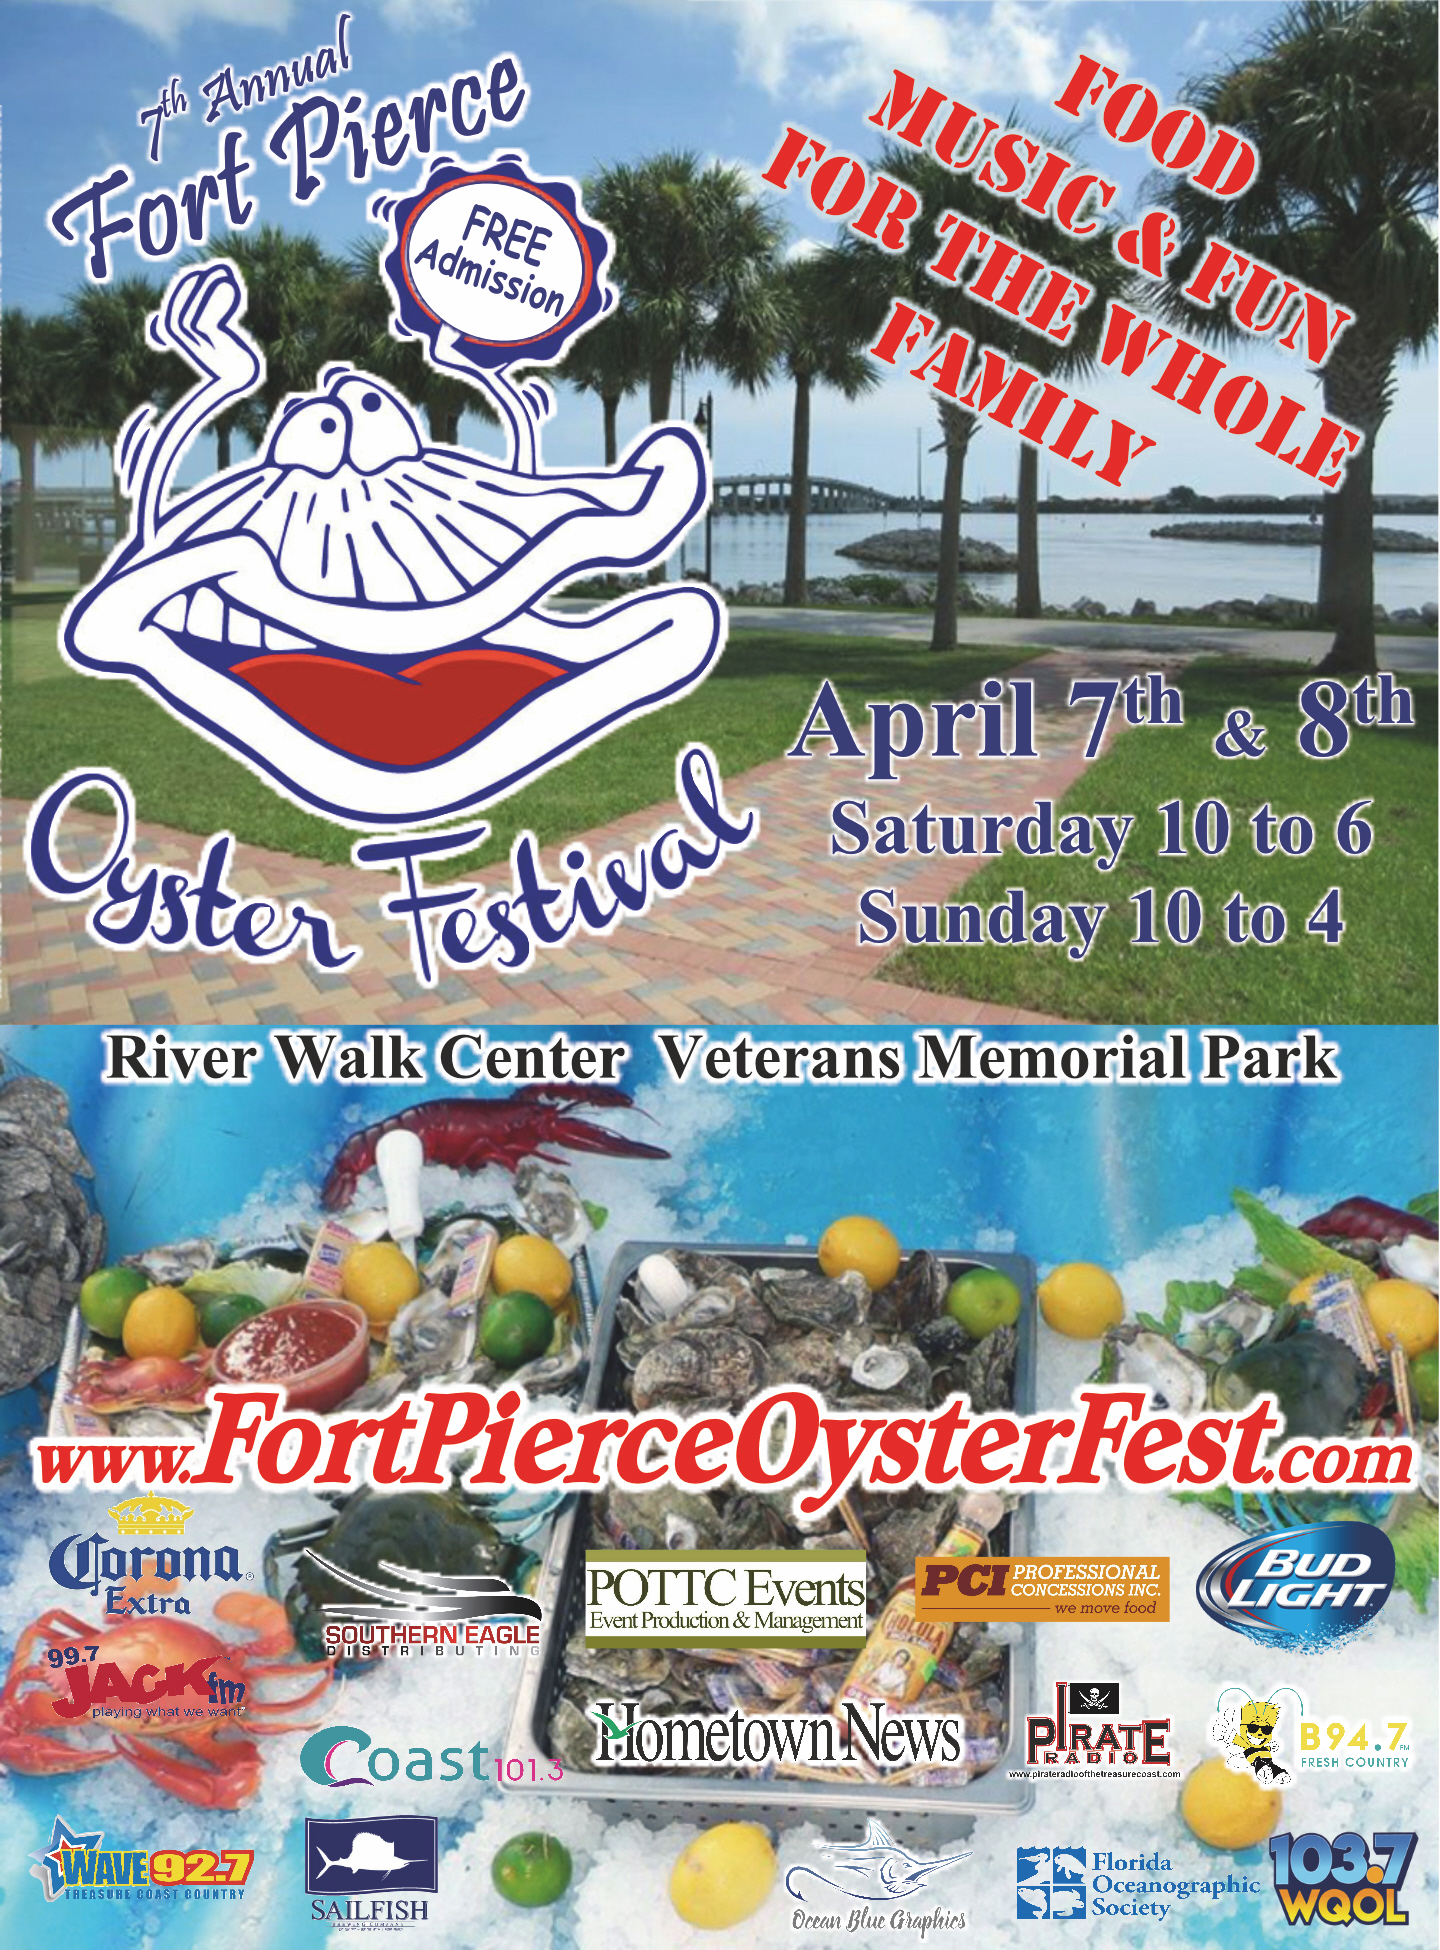 Fort Pierce Oyster and Sea Fest